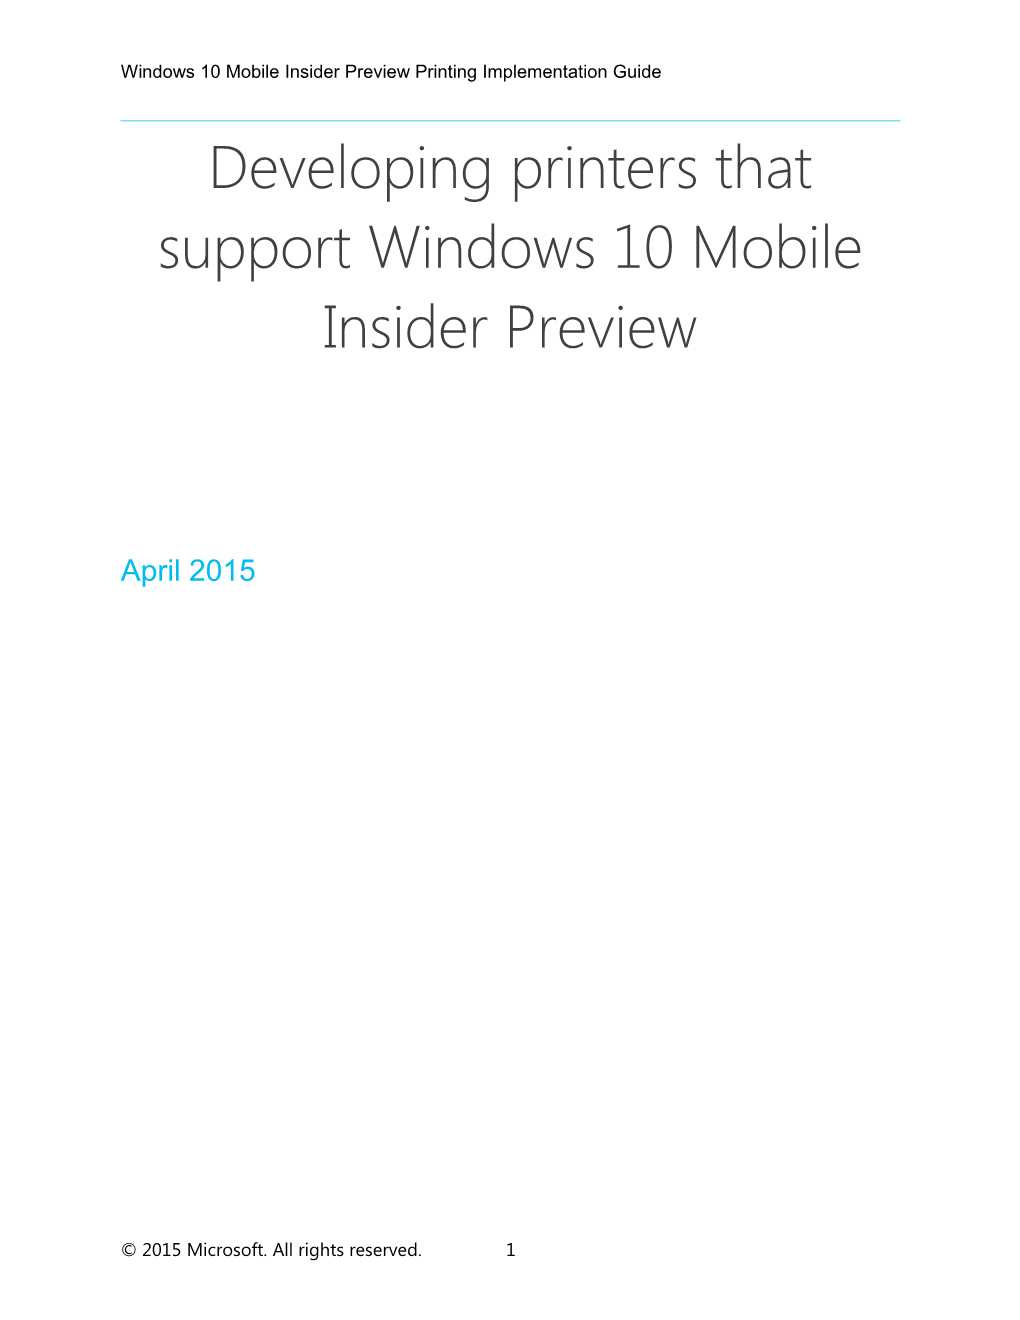 Windows 10 Mobile Insider Preview Printing Implementation Guide